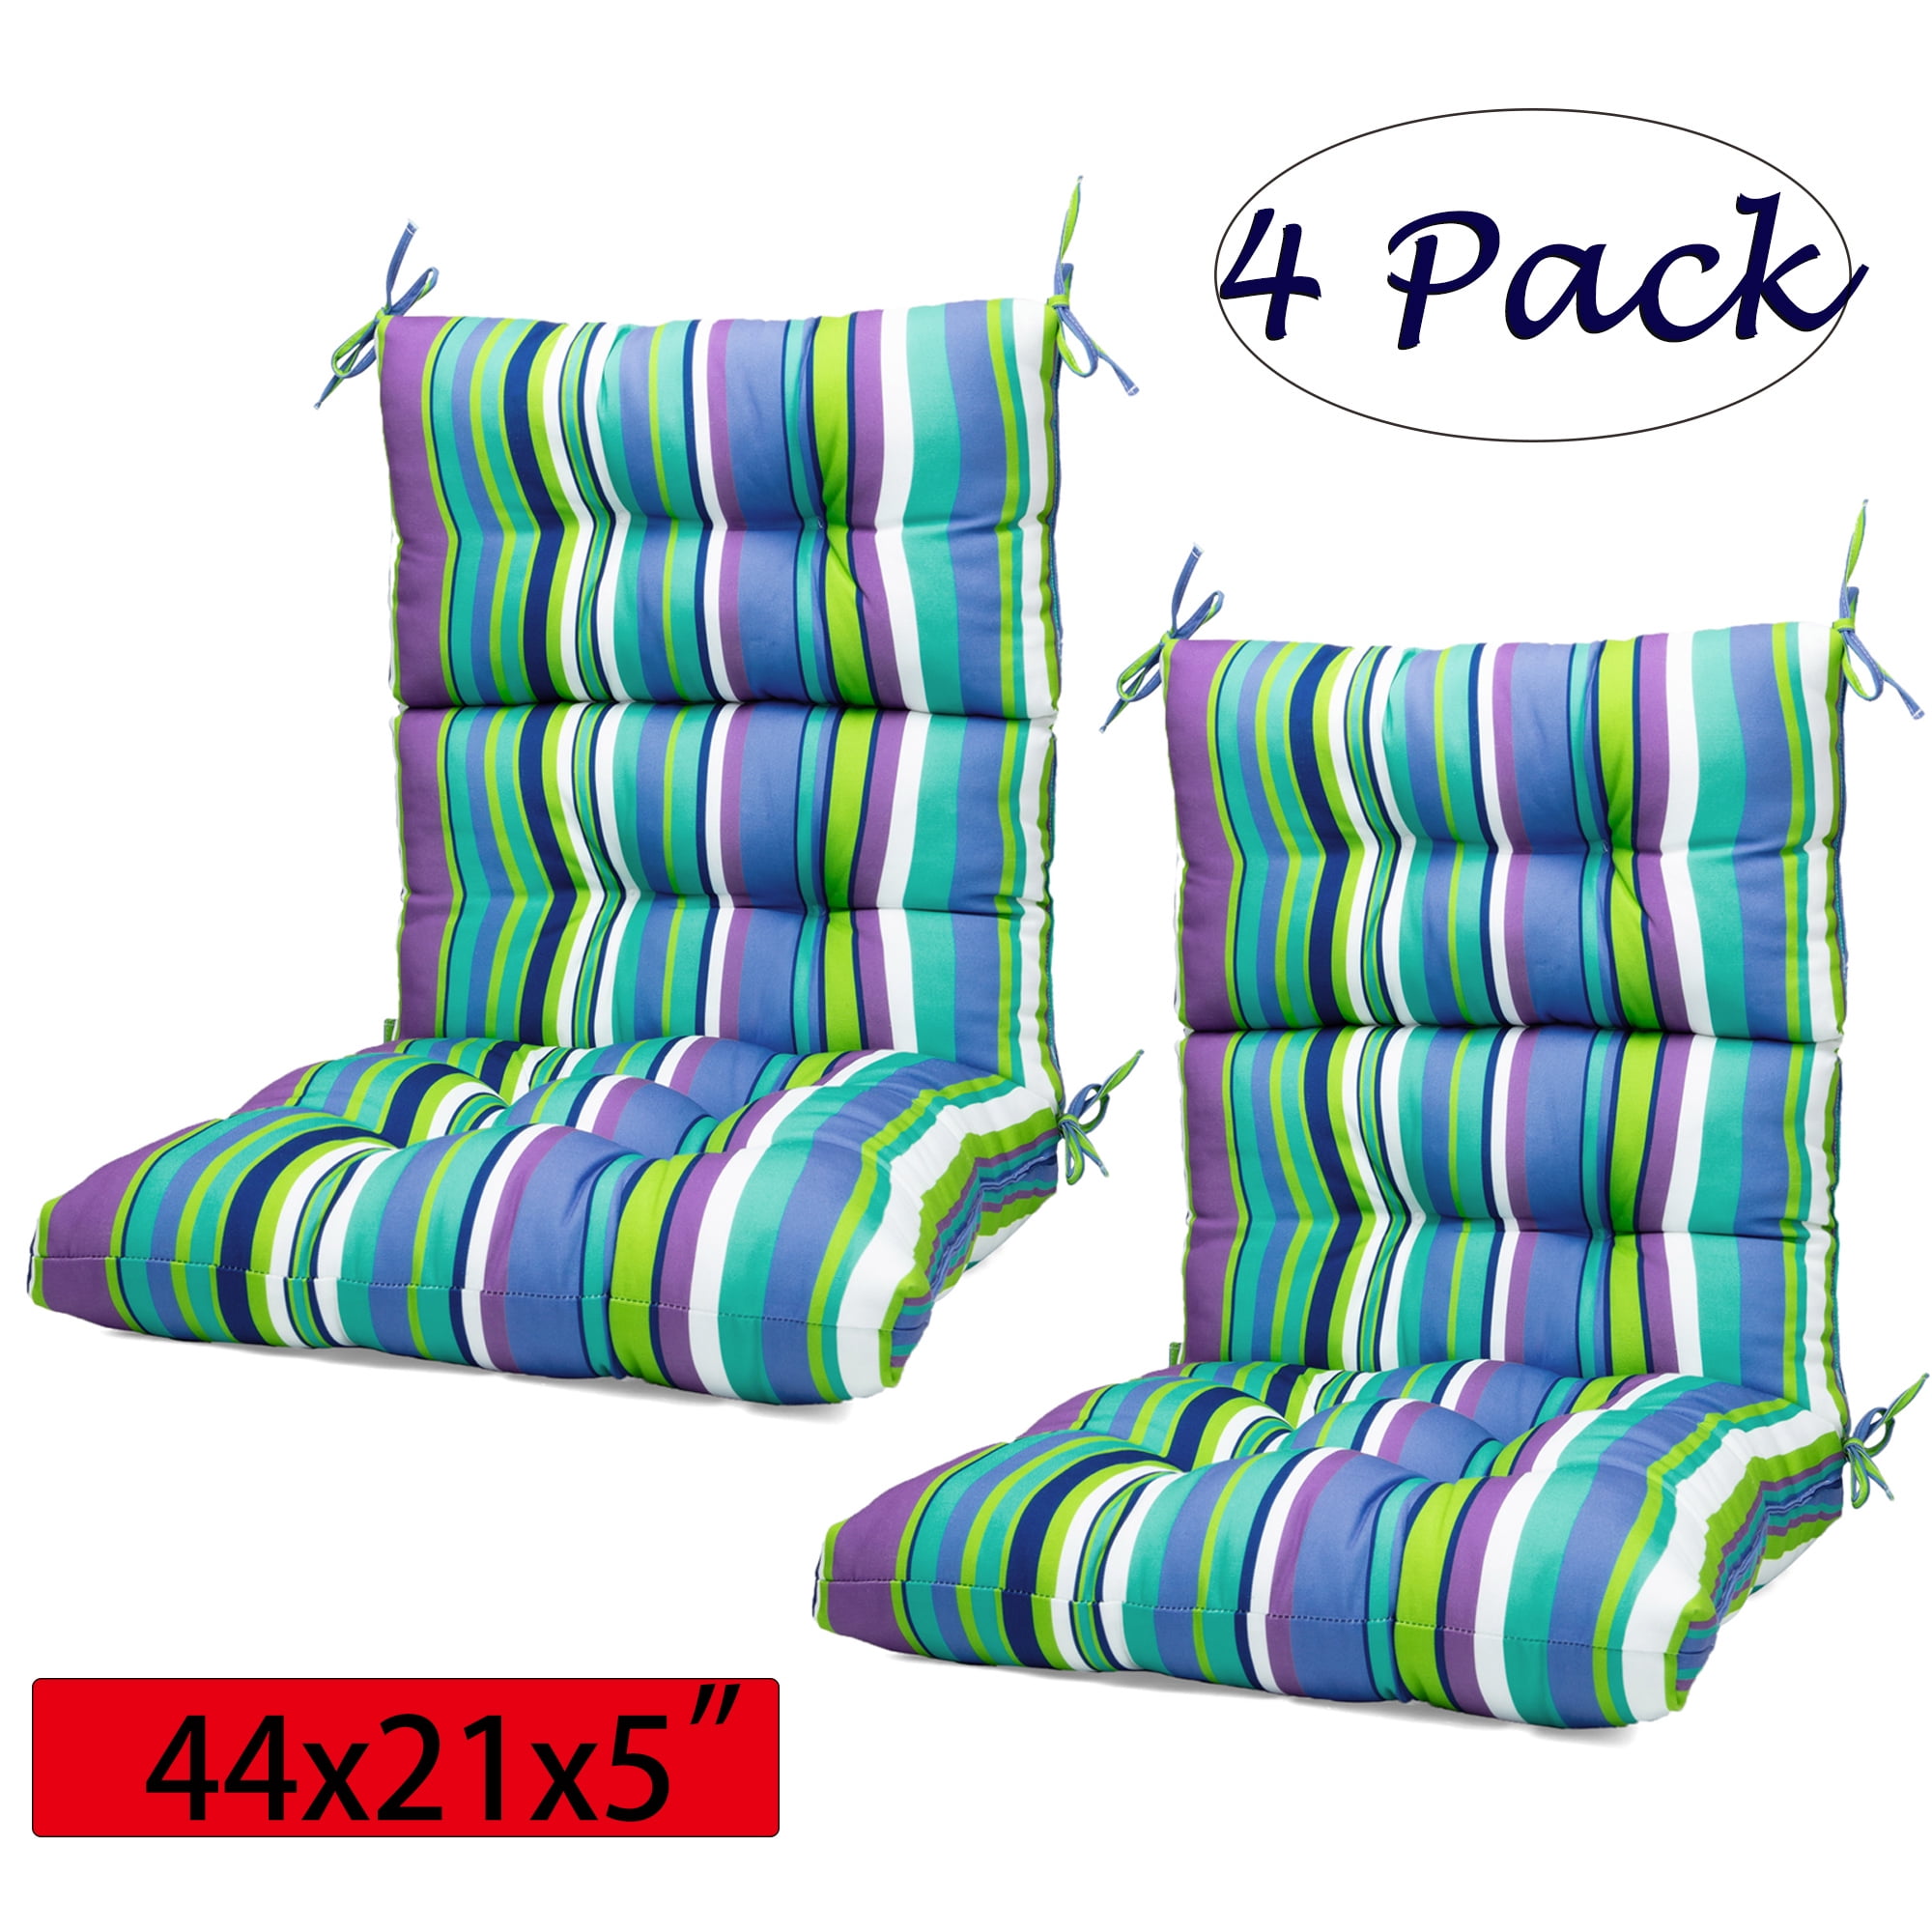 44x21x5 Inch Comfortable Outdoor Dining Chair Cushion High Back Solid